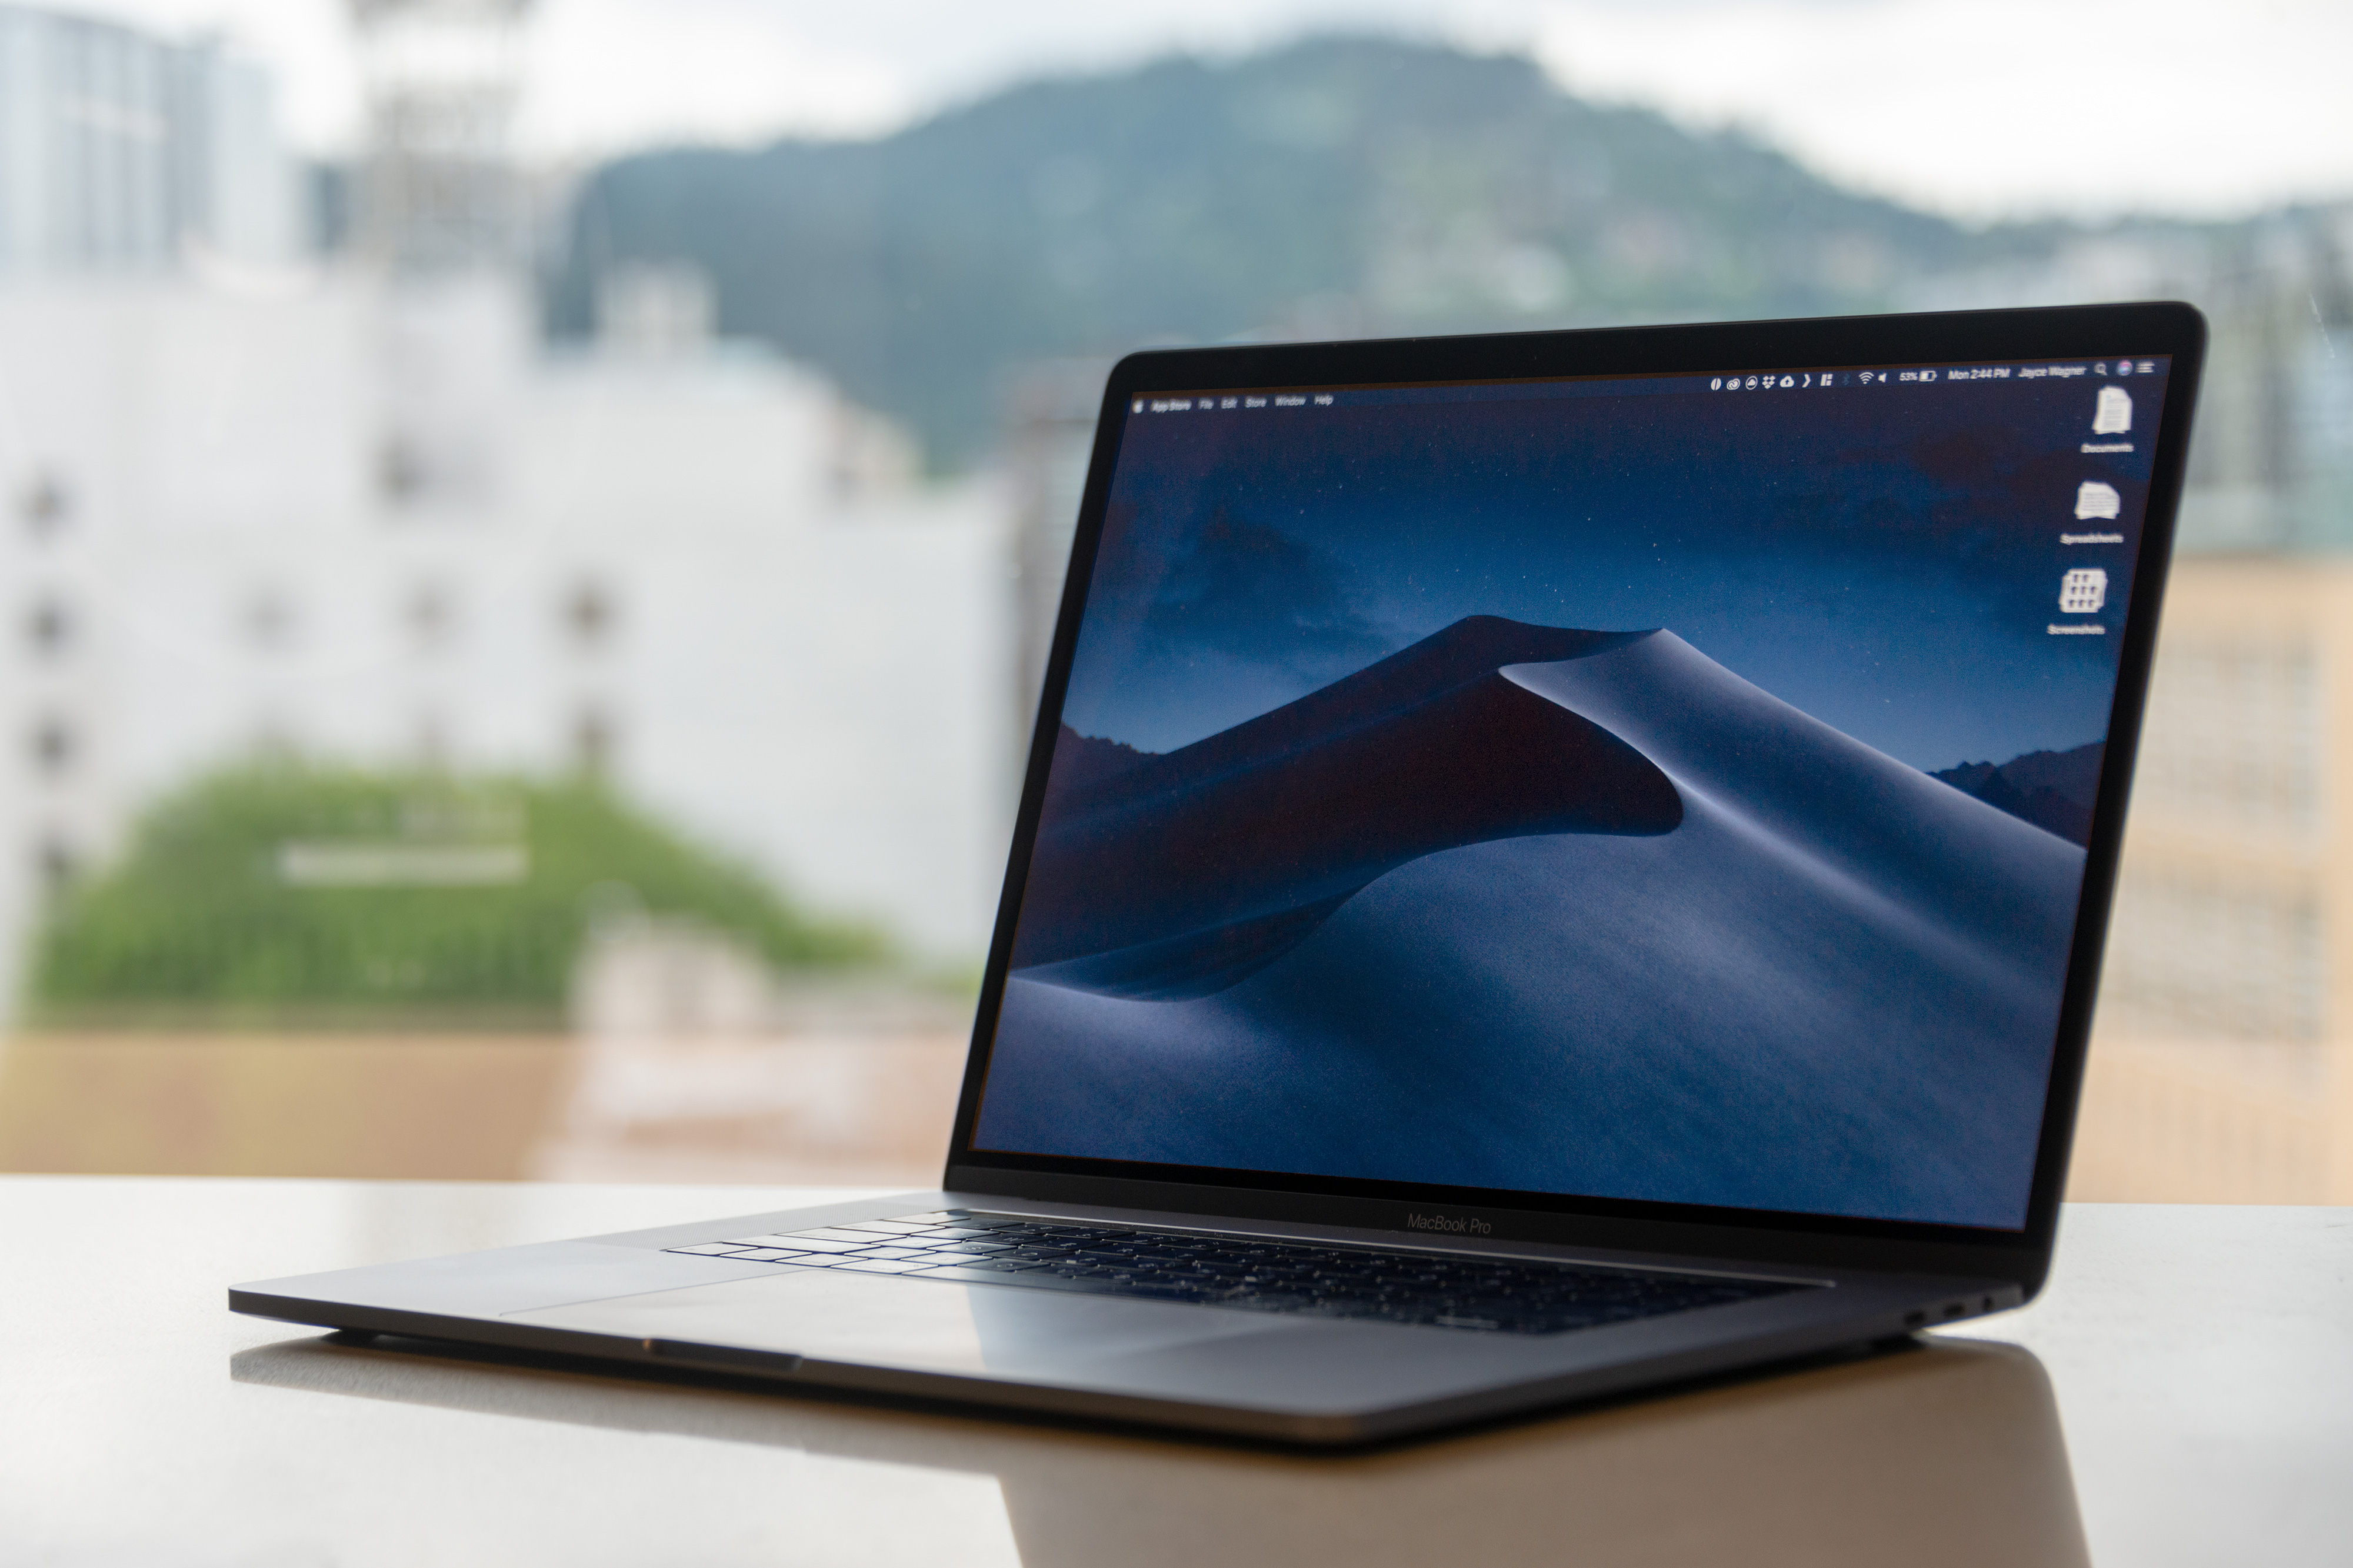 MacOS Mojave: The Best New Features Coming to Your Mac | Digital Trends